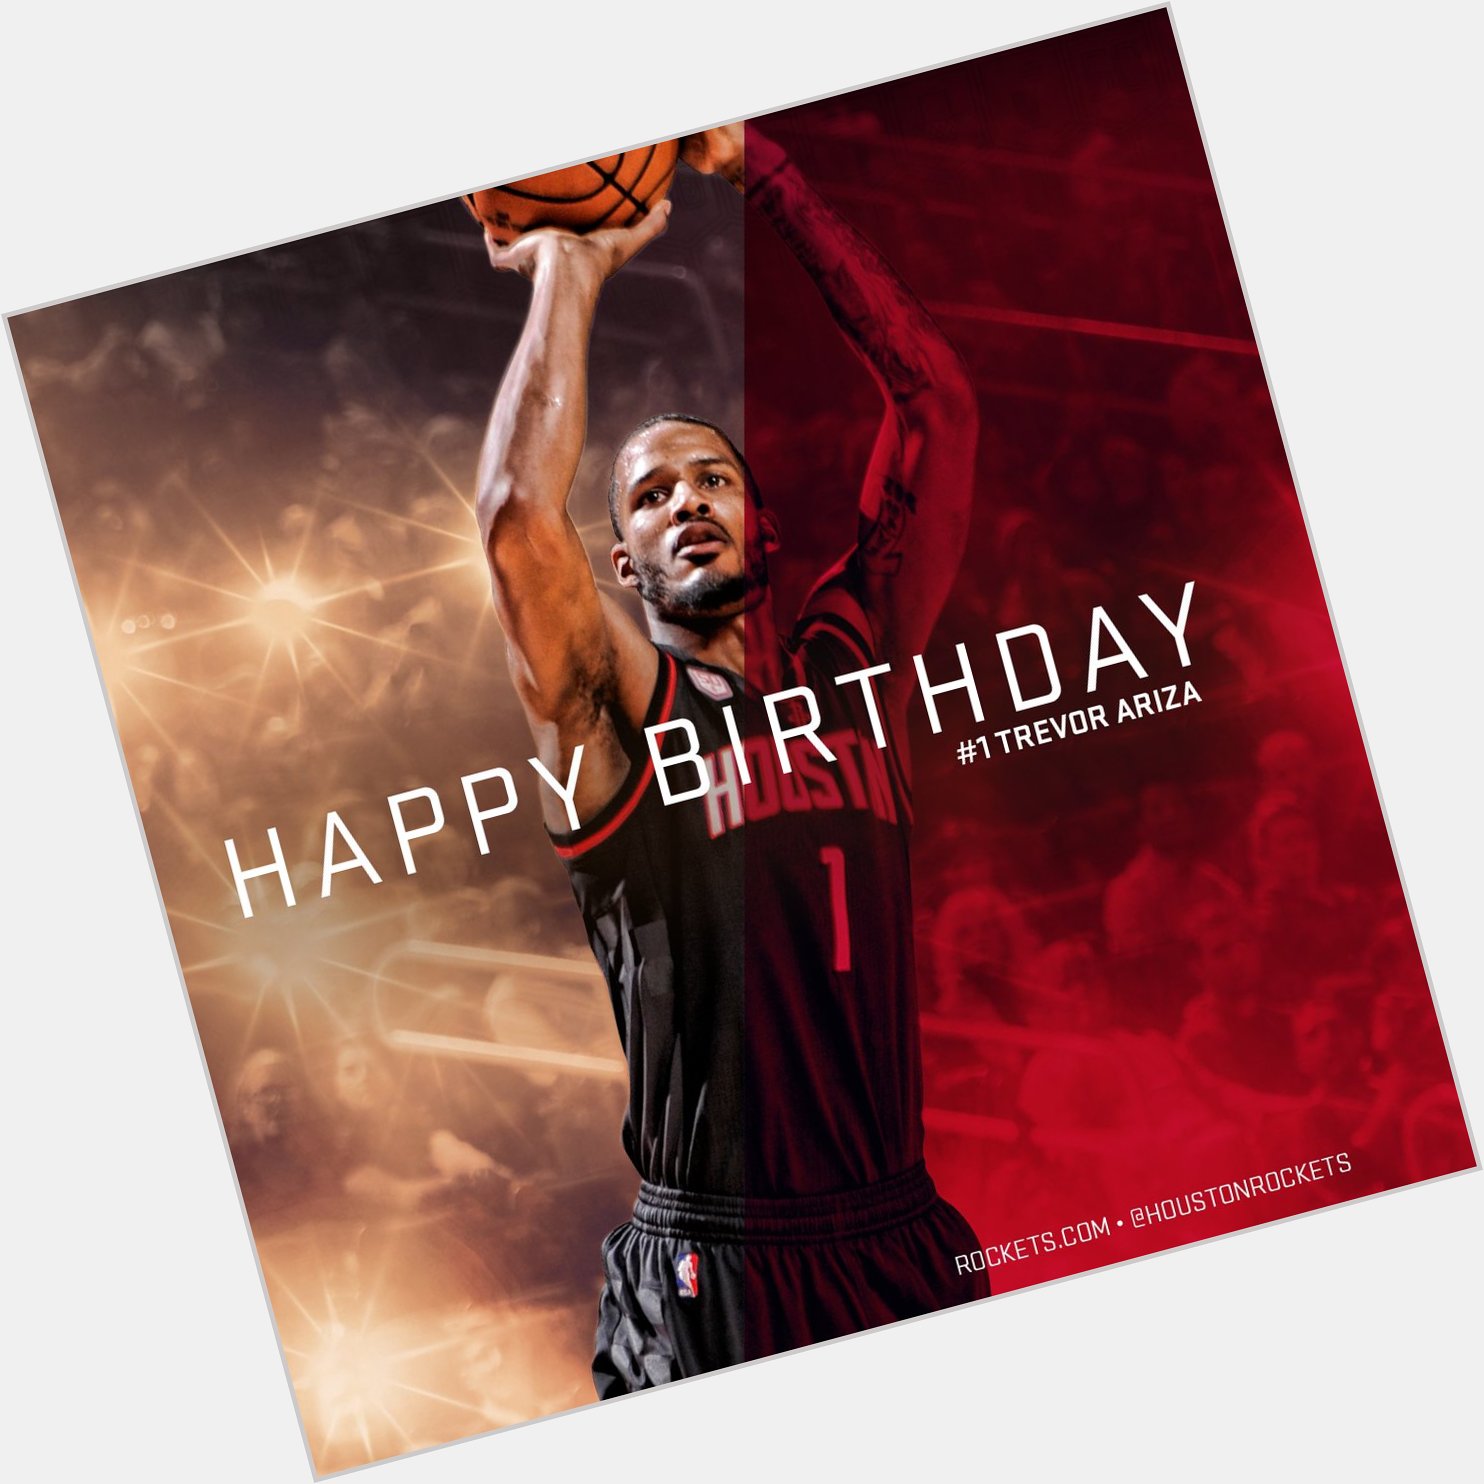 To join us in wishing a very Happy Birthday to Trevor Ariza!   